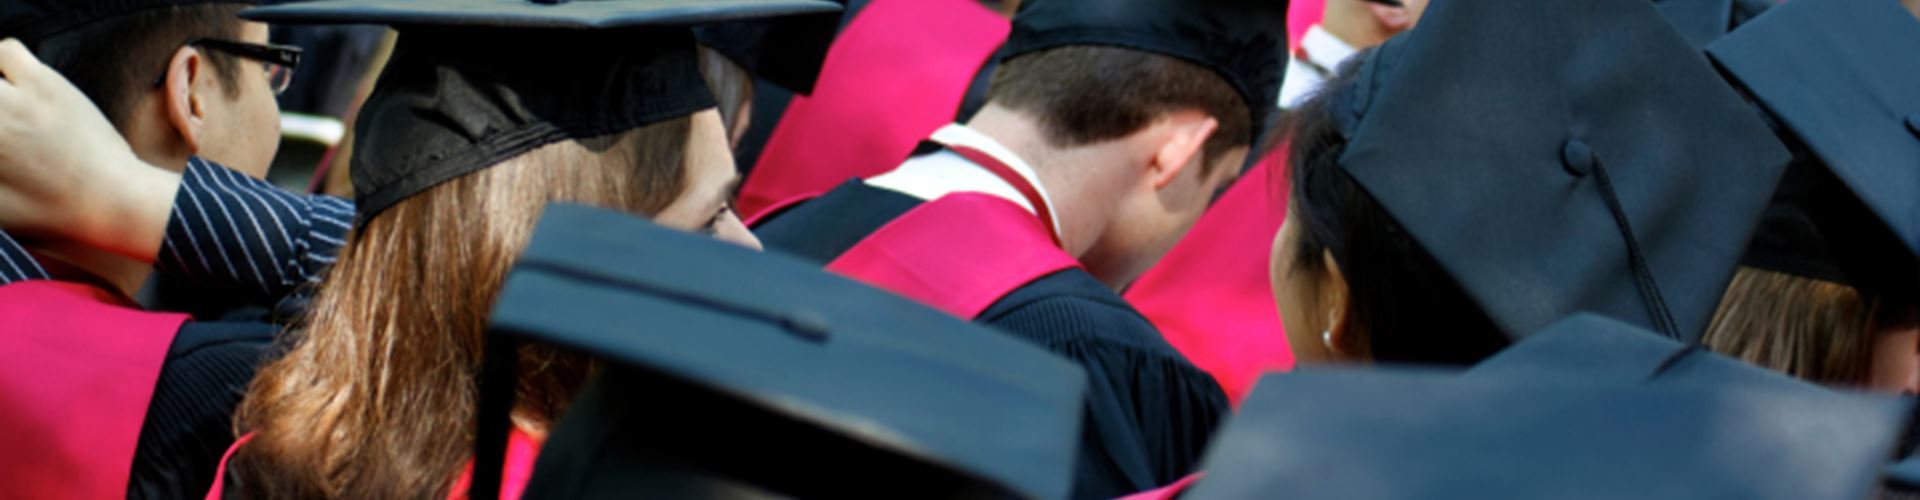 Graduates look for more than salary, EY research says